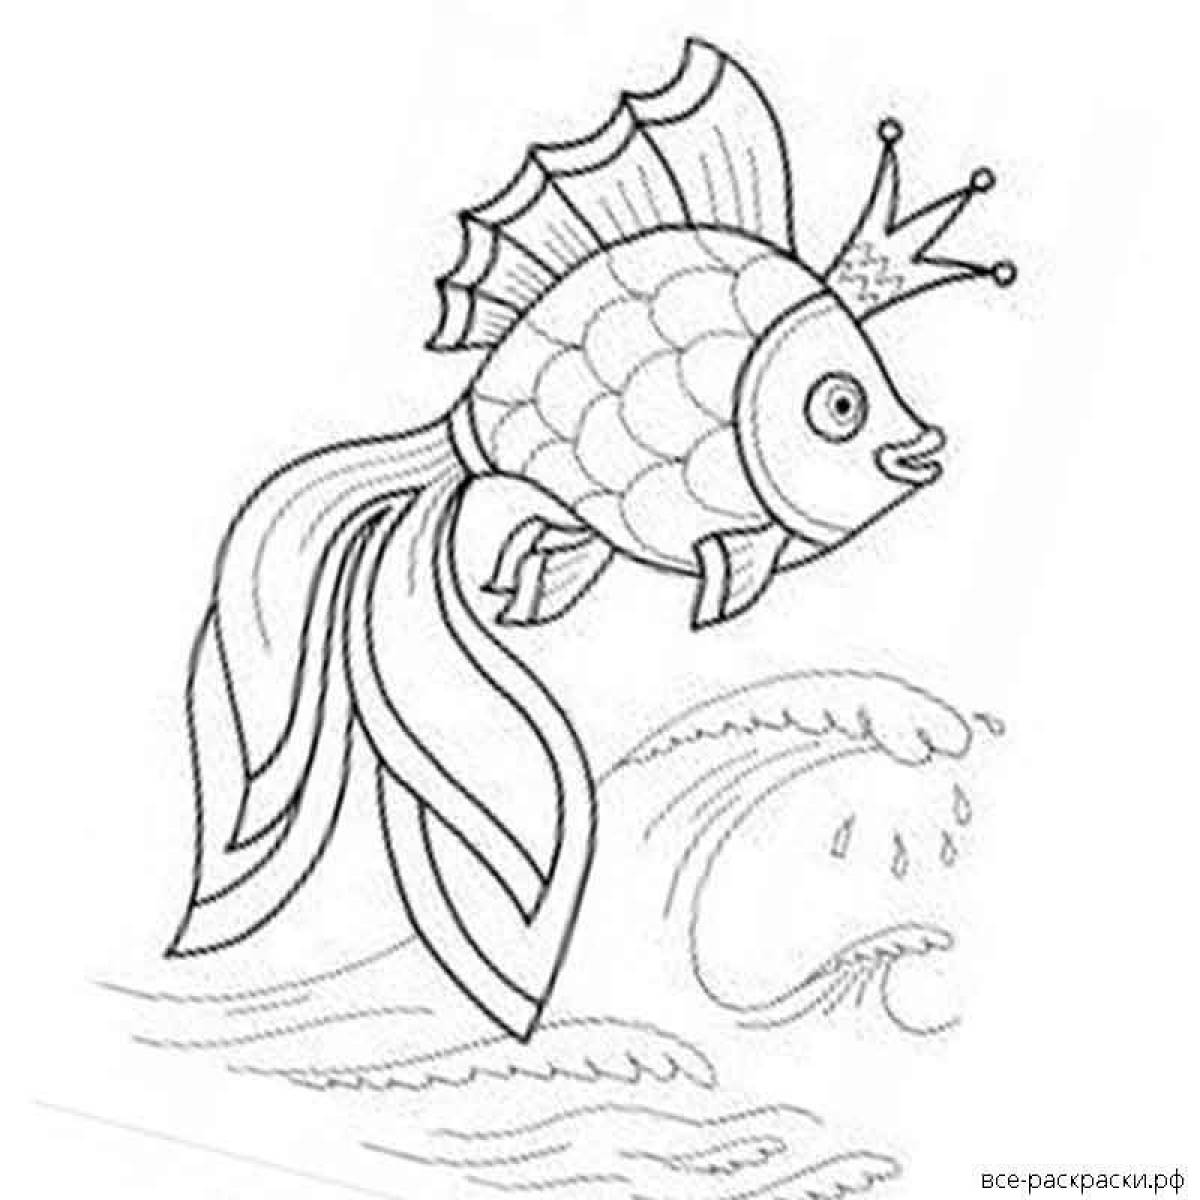 Lovely goldfish coloring page for kids